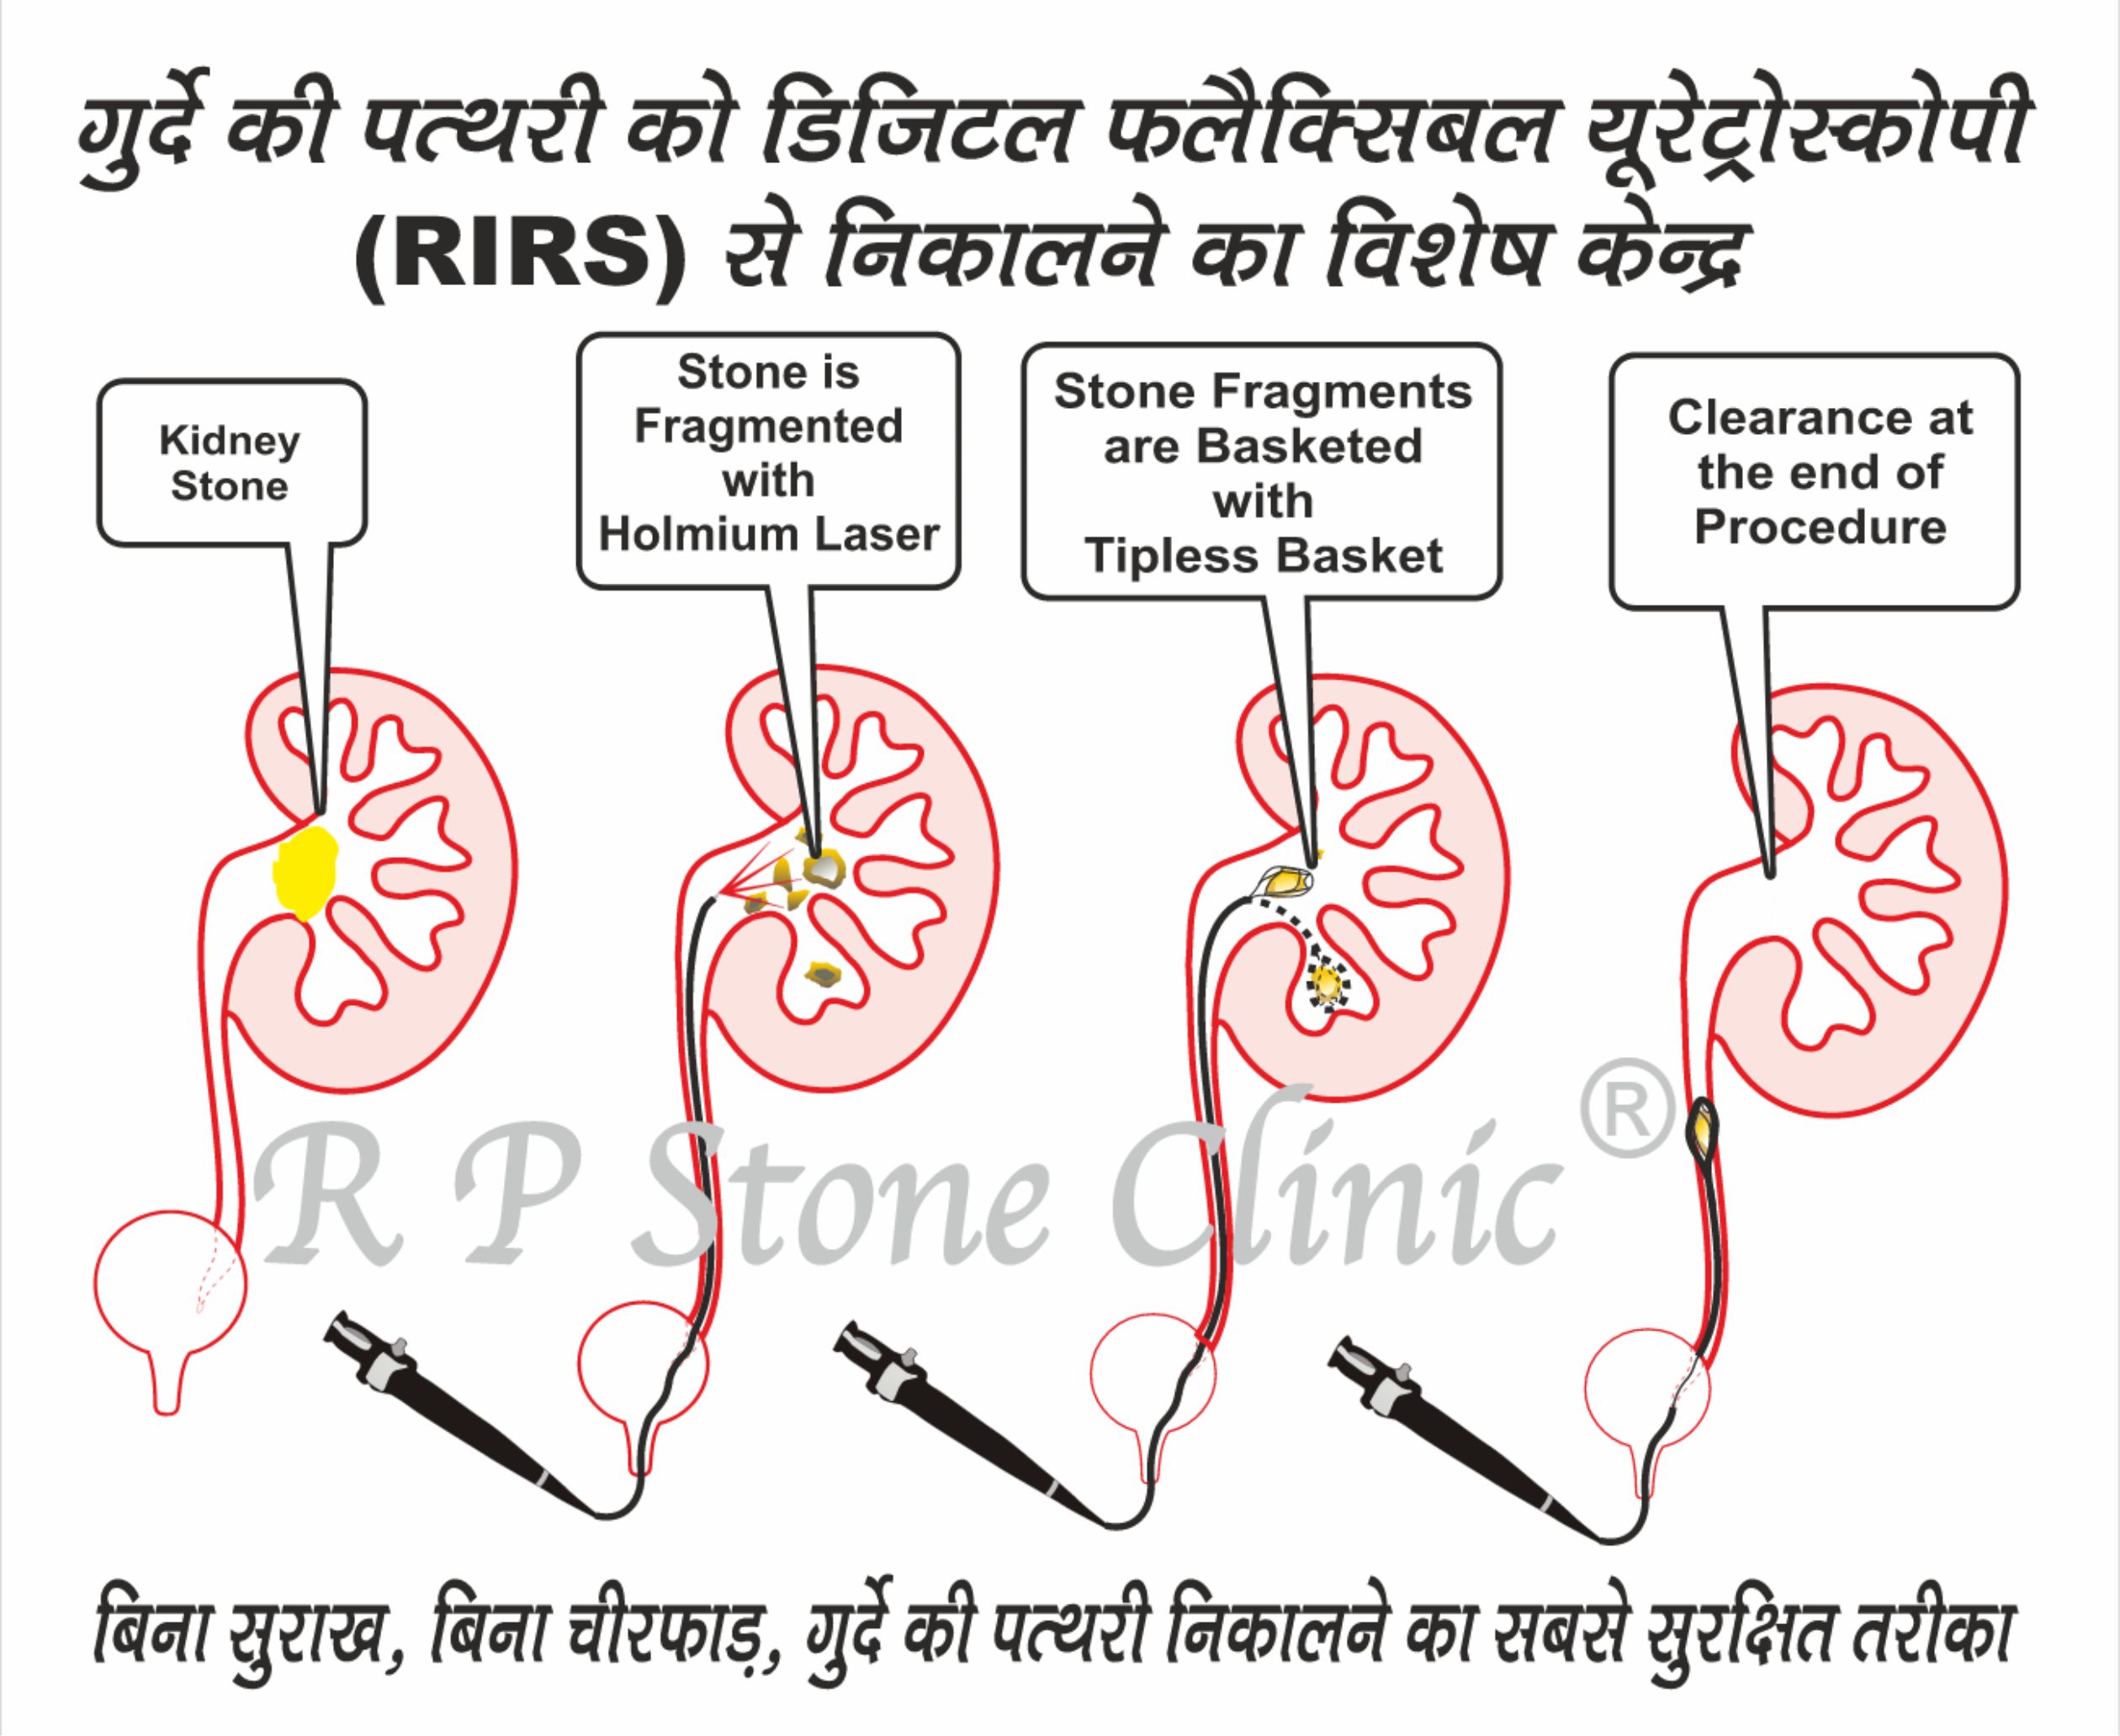 rirs-for-kidney-stone